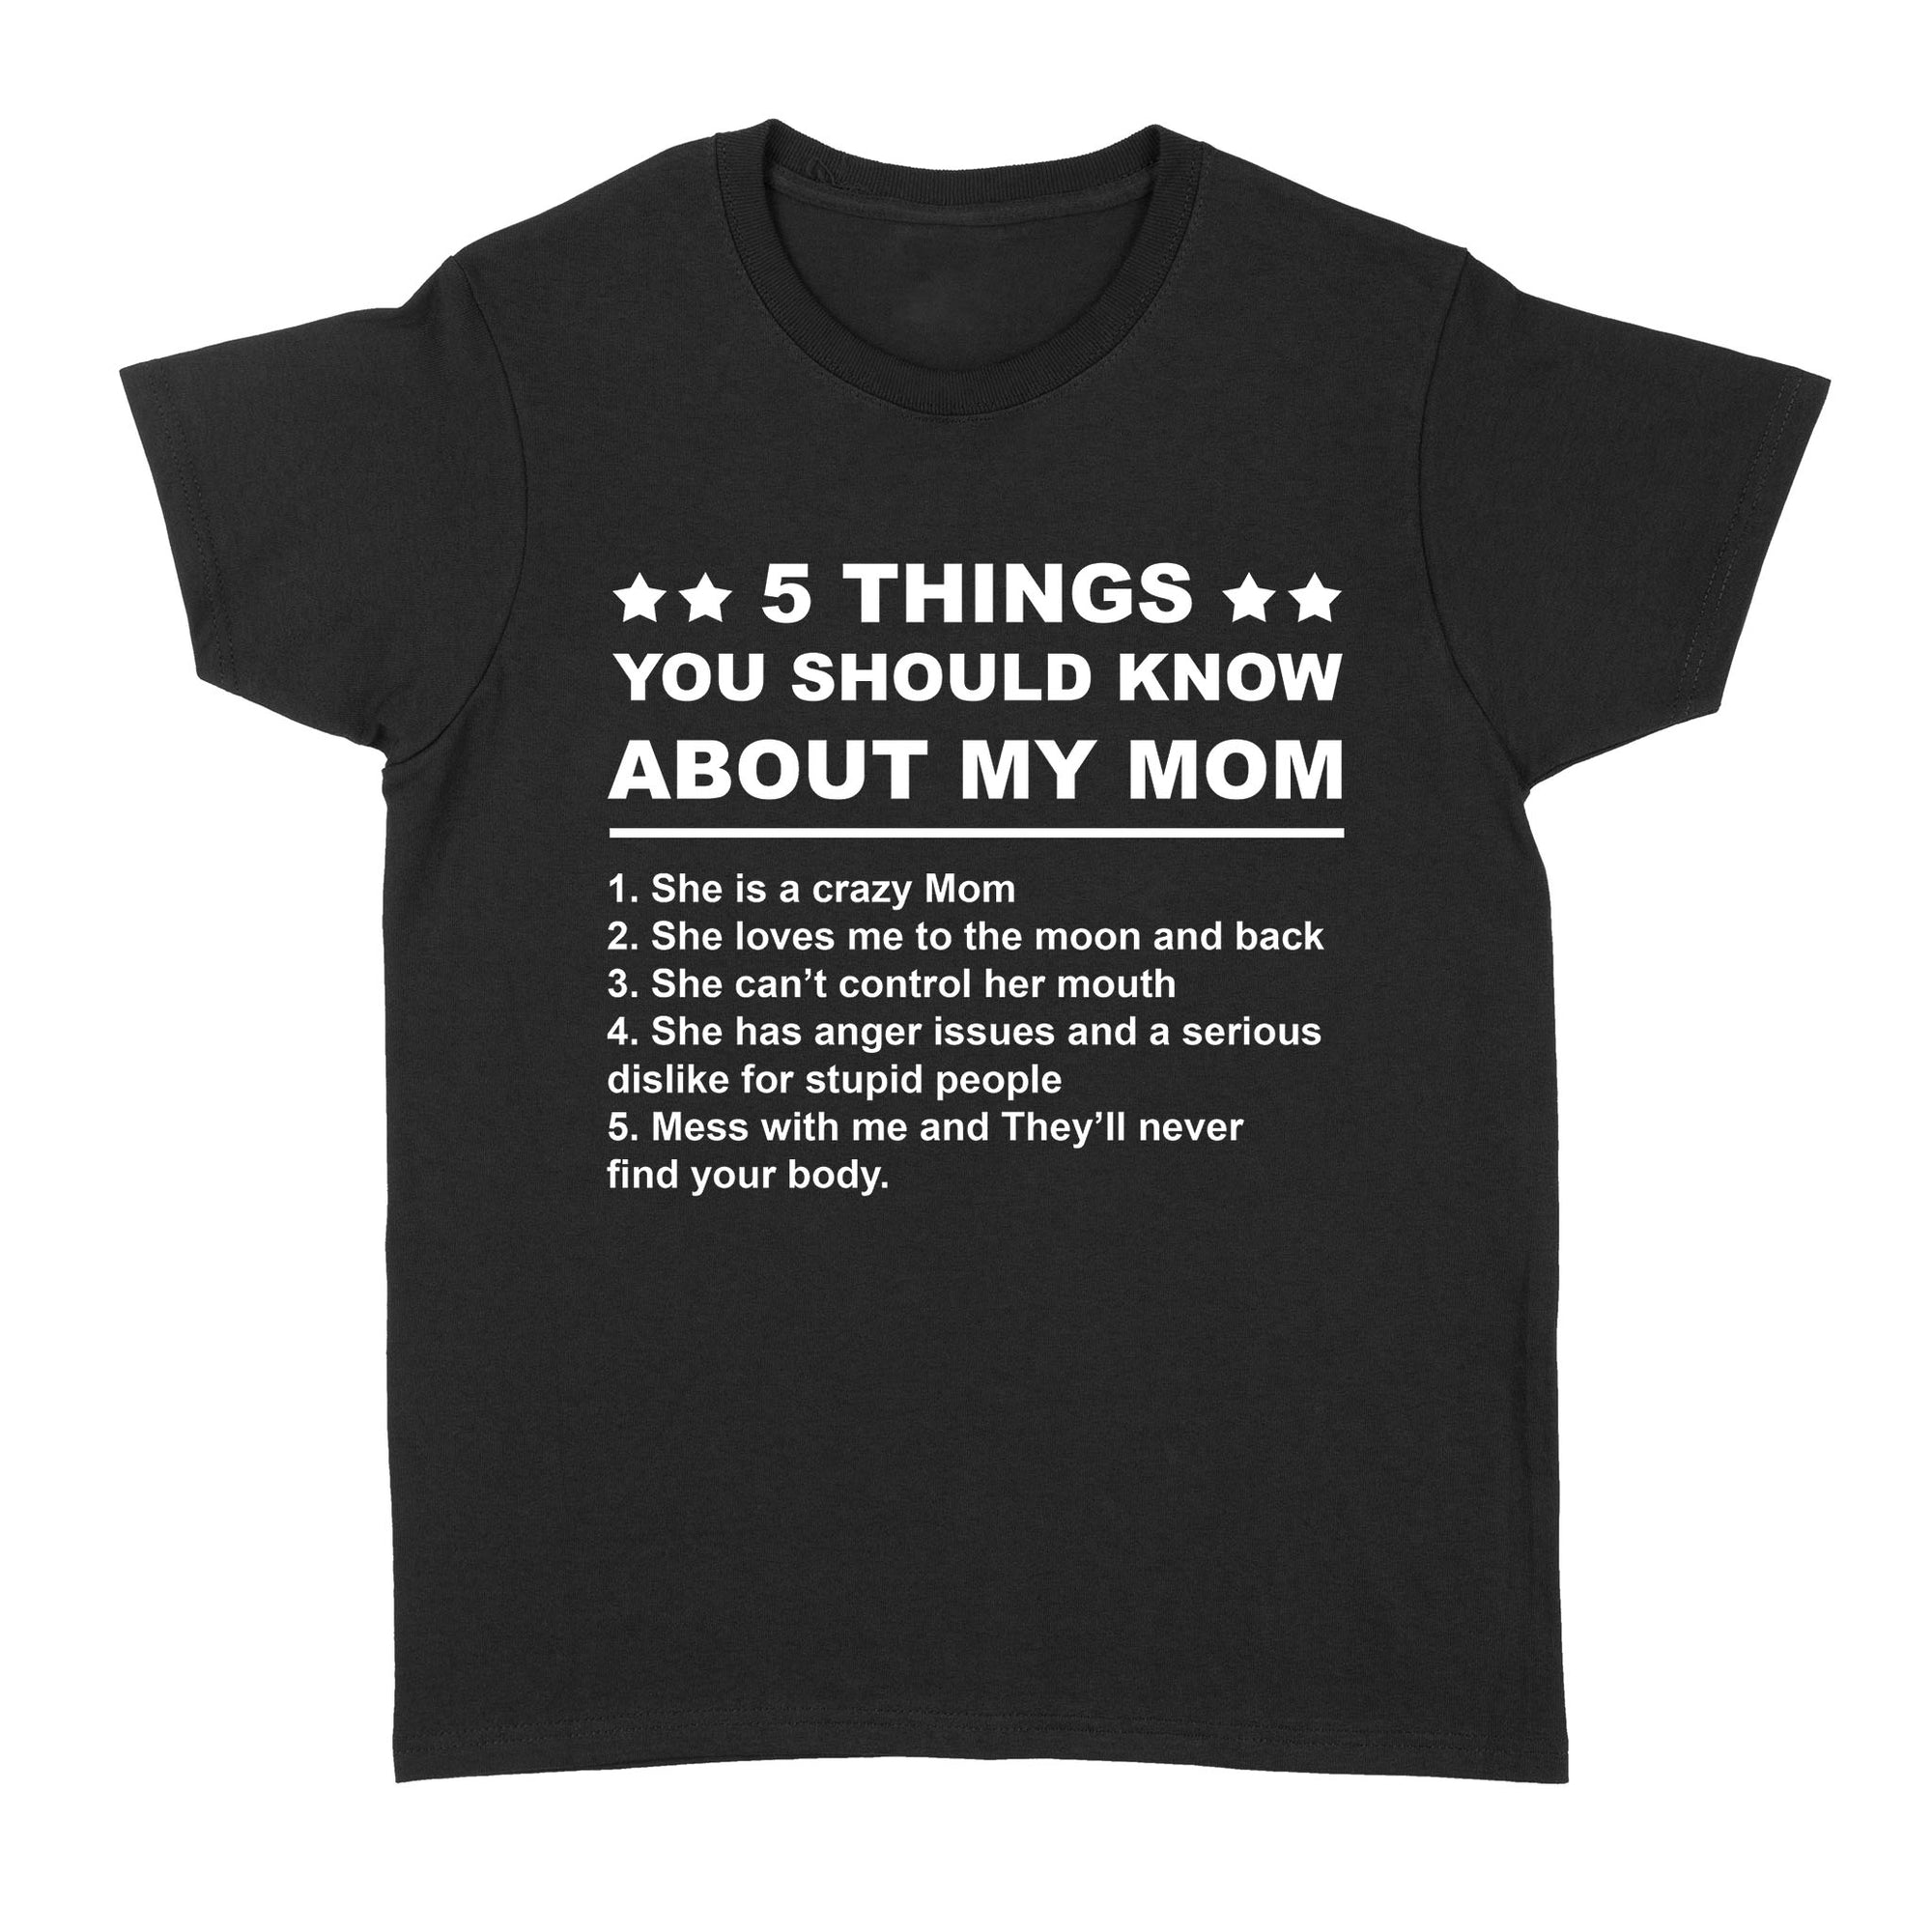 Gift Ideas for Daughter 5 Things You Should Know About My Mom - Standard Women's T-shirt